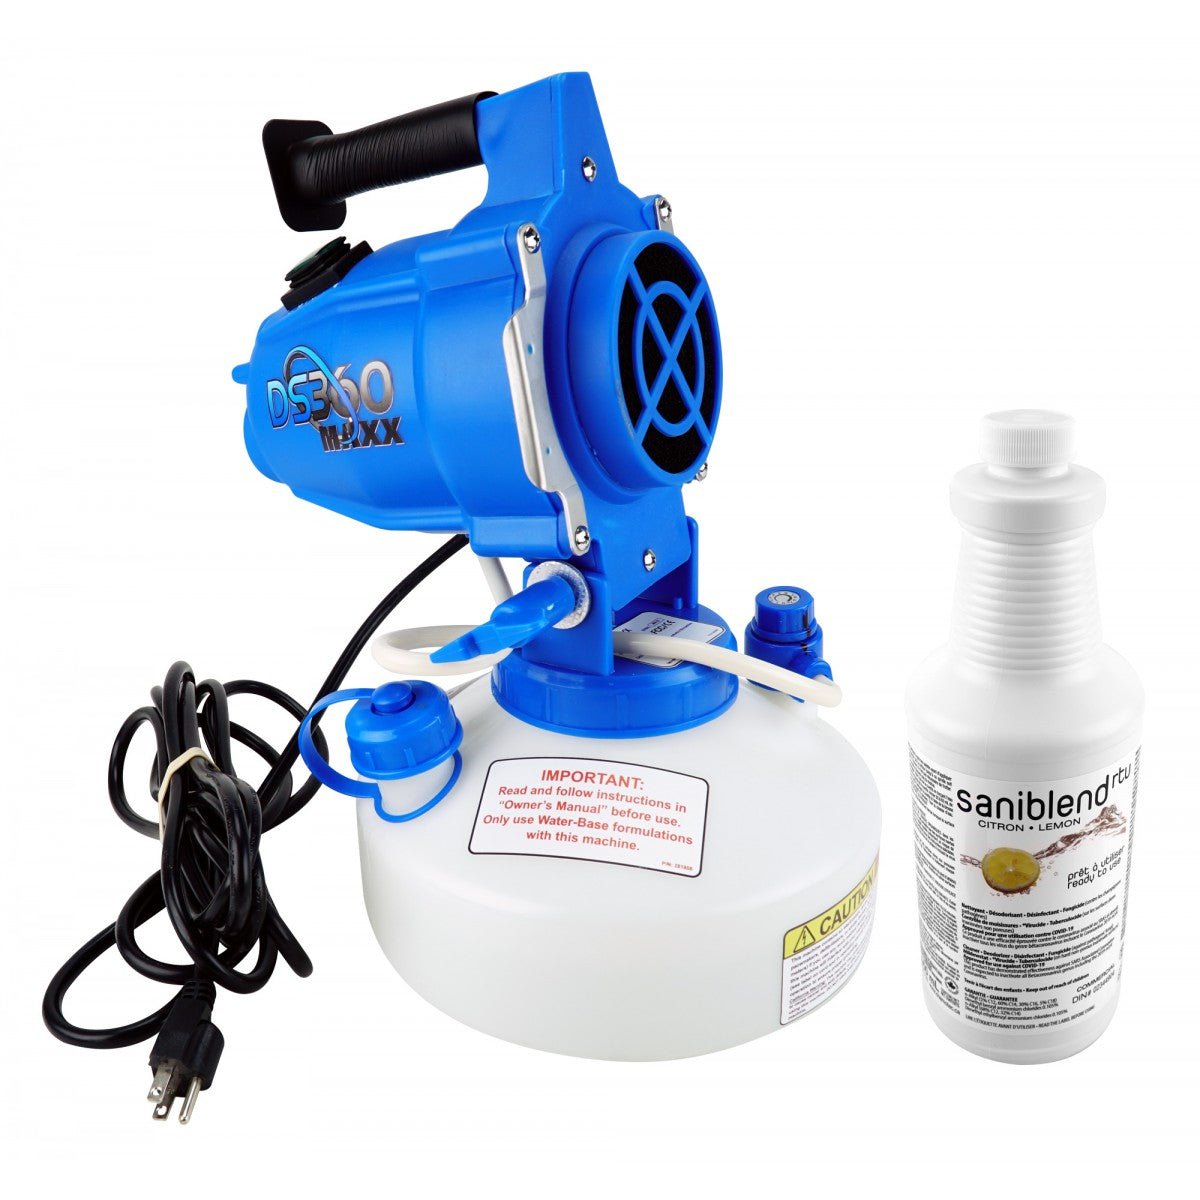 Electrostatic Sprayer - With Cleaner ECO710 - 33.08 oz Tank Capacity - Adjustable Flow Rate - For use against coronavirus (COVID-19) - Super Vacs